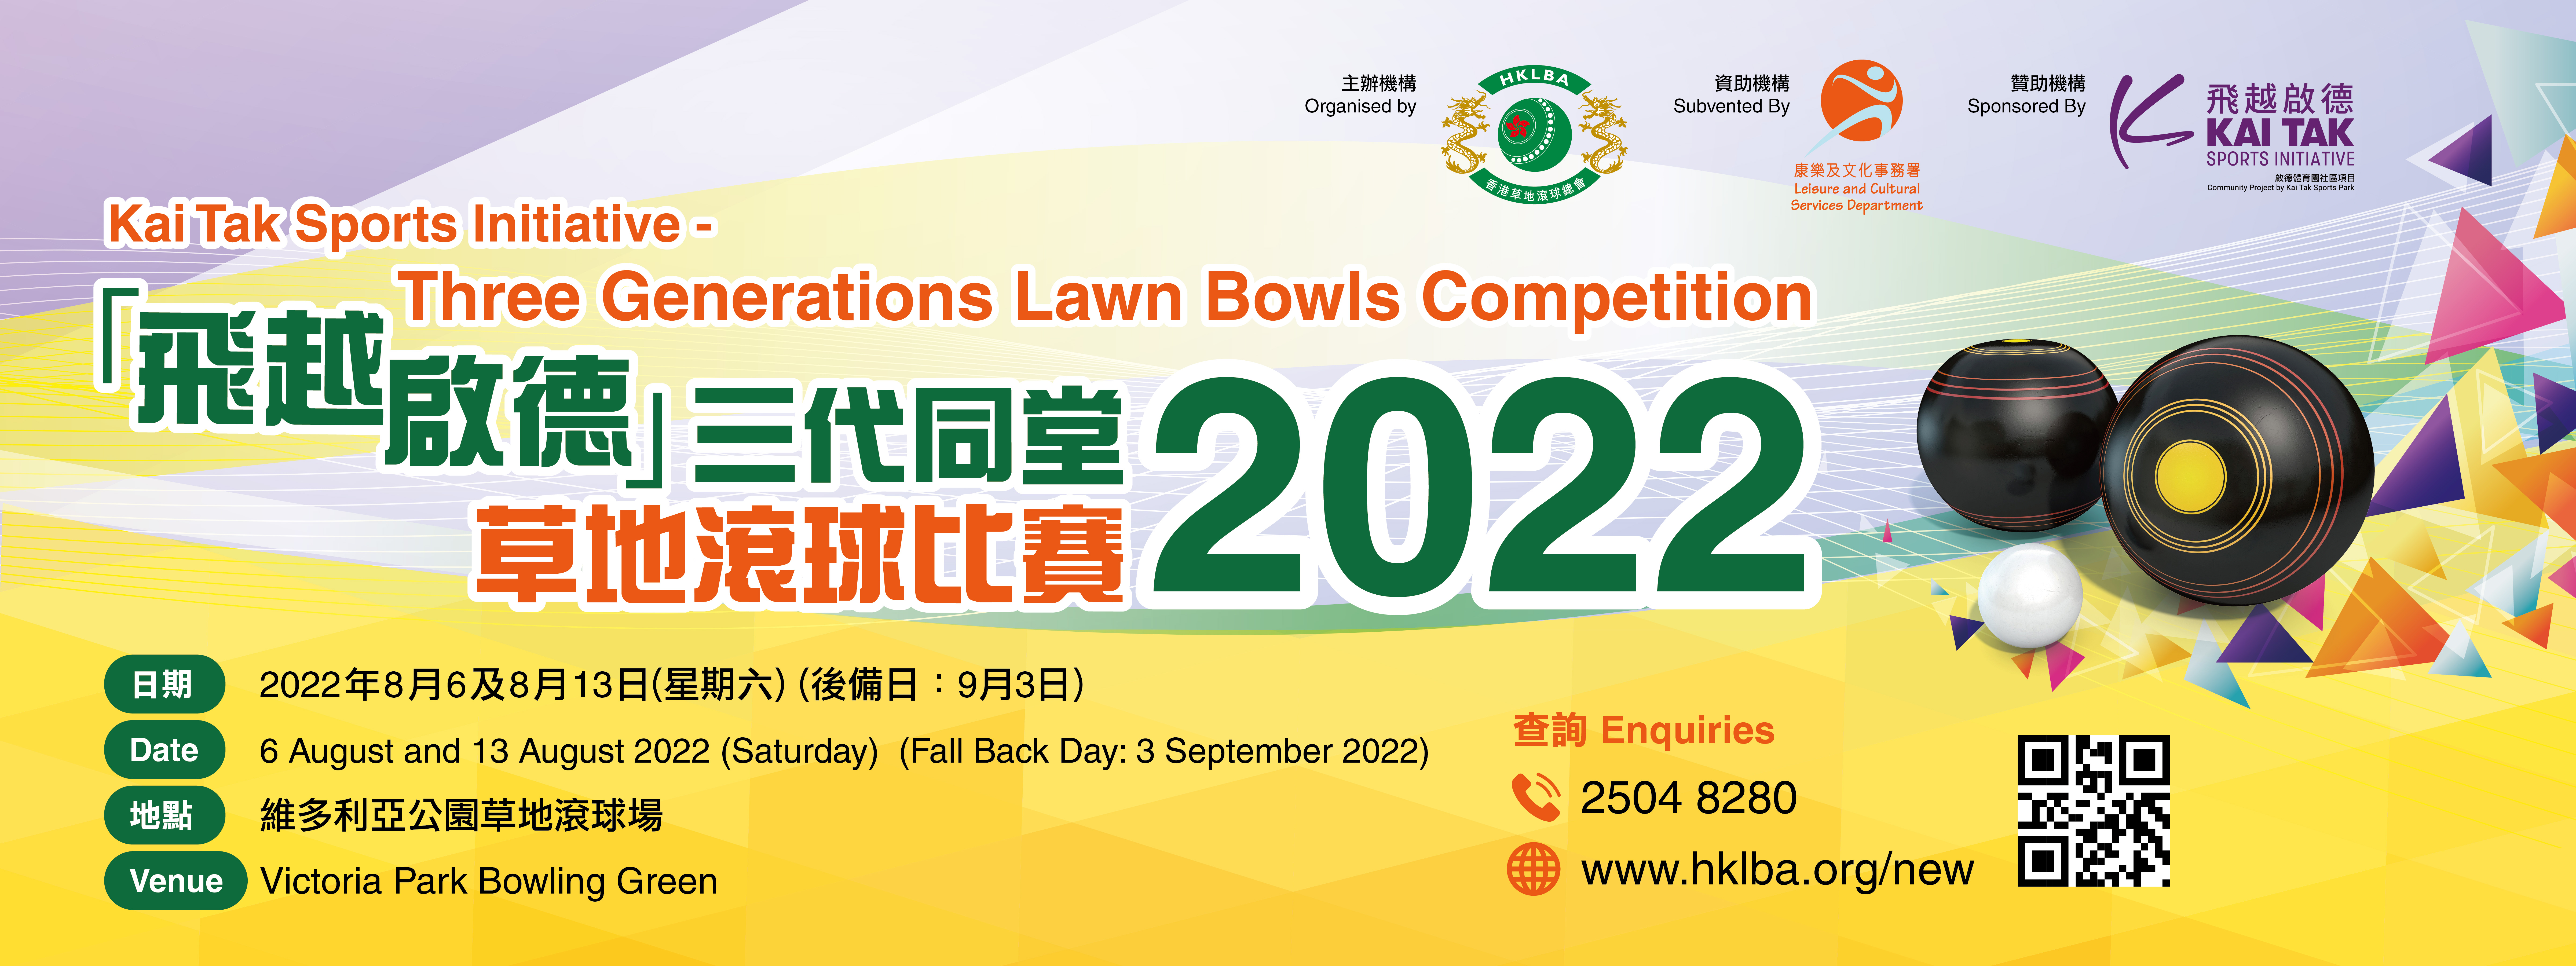 KTSI Three Generations Lawn Bowls Competition 2022-Start Entry!